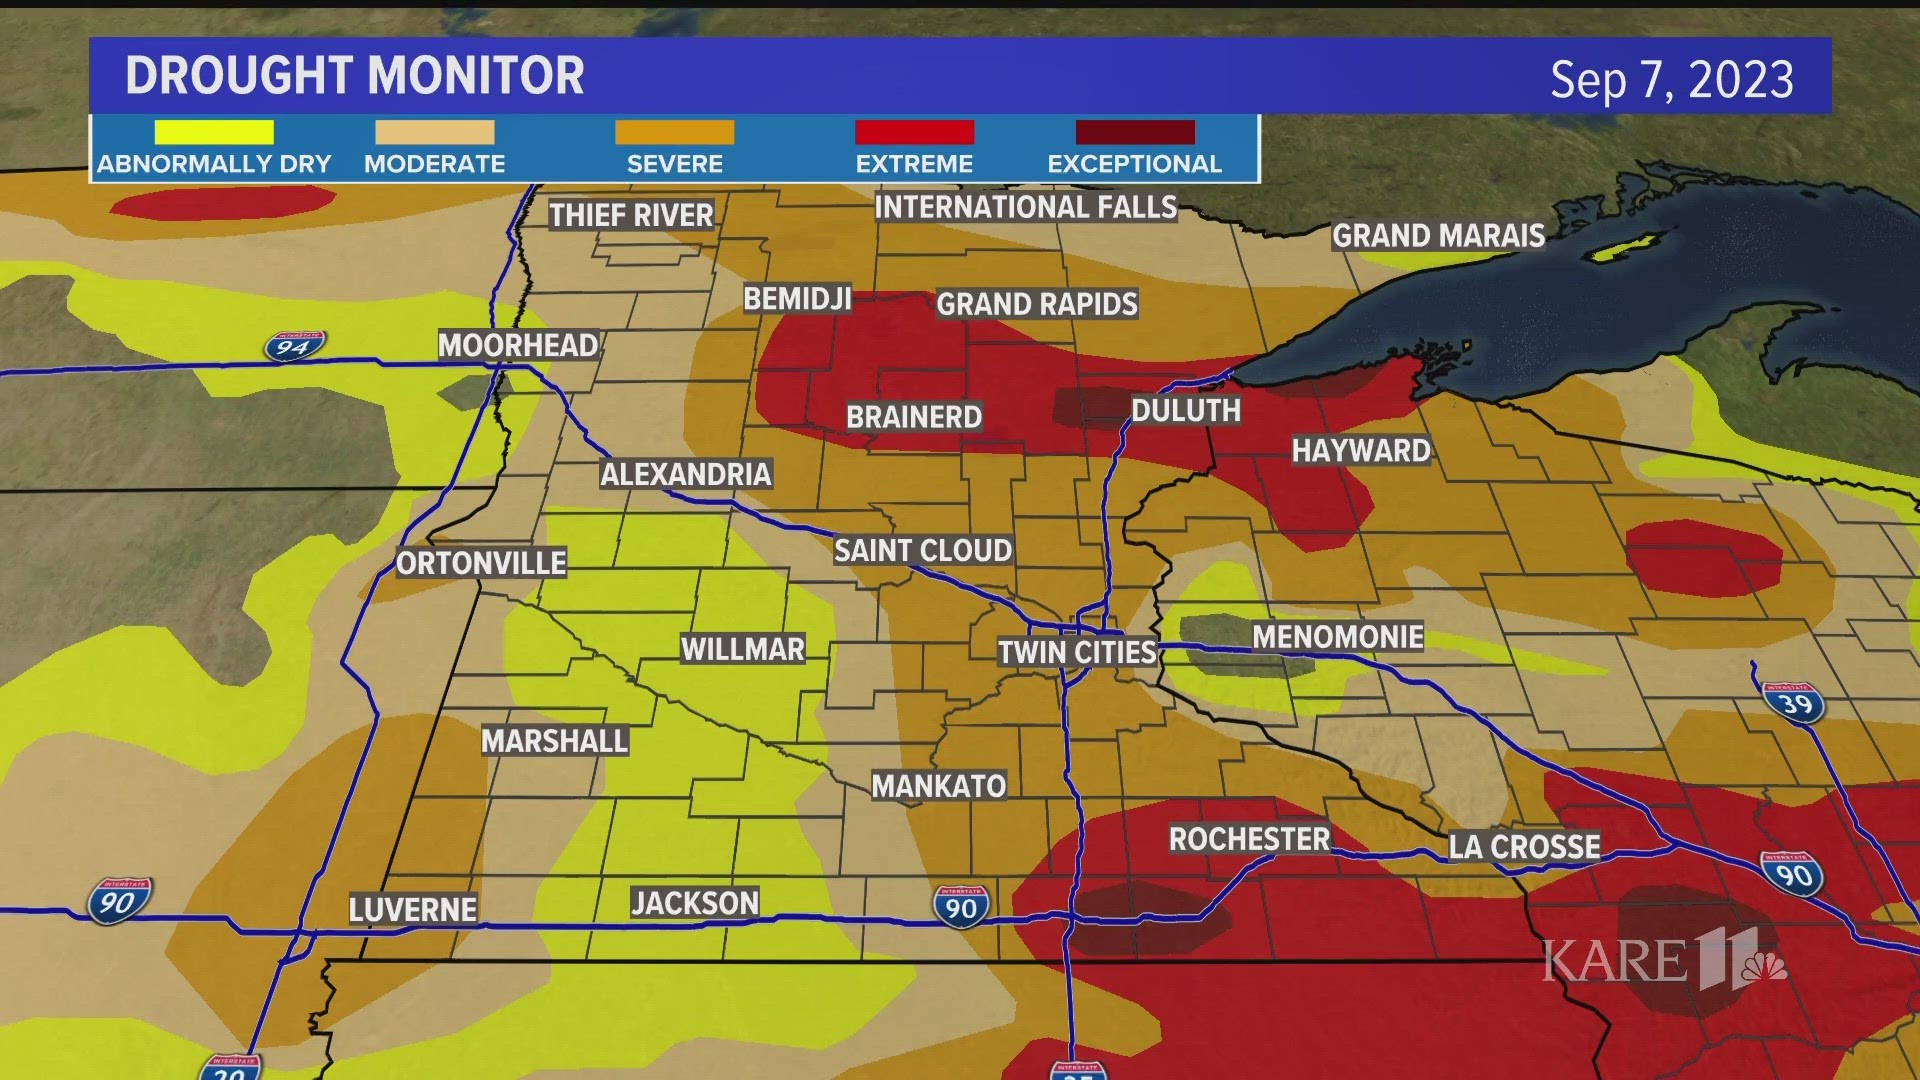 It's the first time this year exceptional drought conditions are being reported in portions of Minnesota.